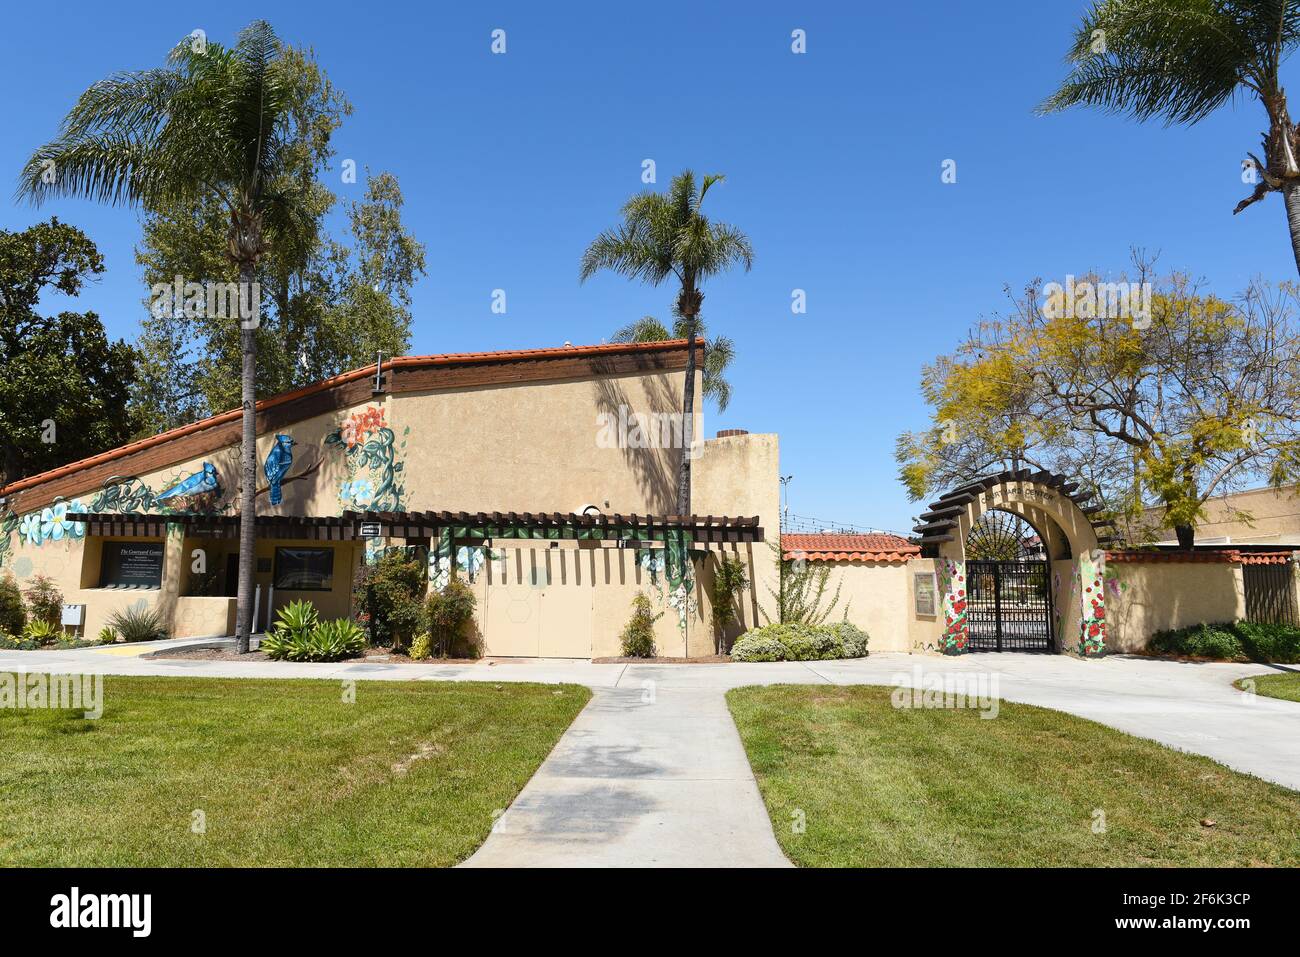 GARDEN GROVE, CALIFORNIA - 31 MAR 2021: The Courtyard Center on the Village Green is a Performance and Event Venue. Stock Photo